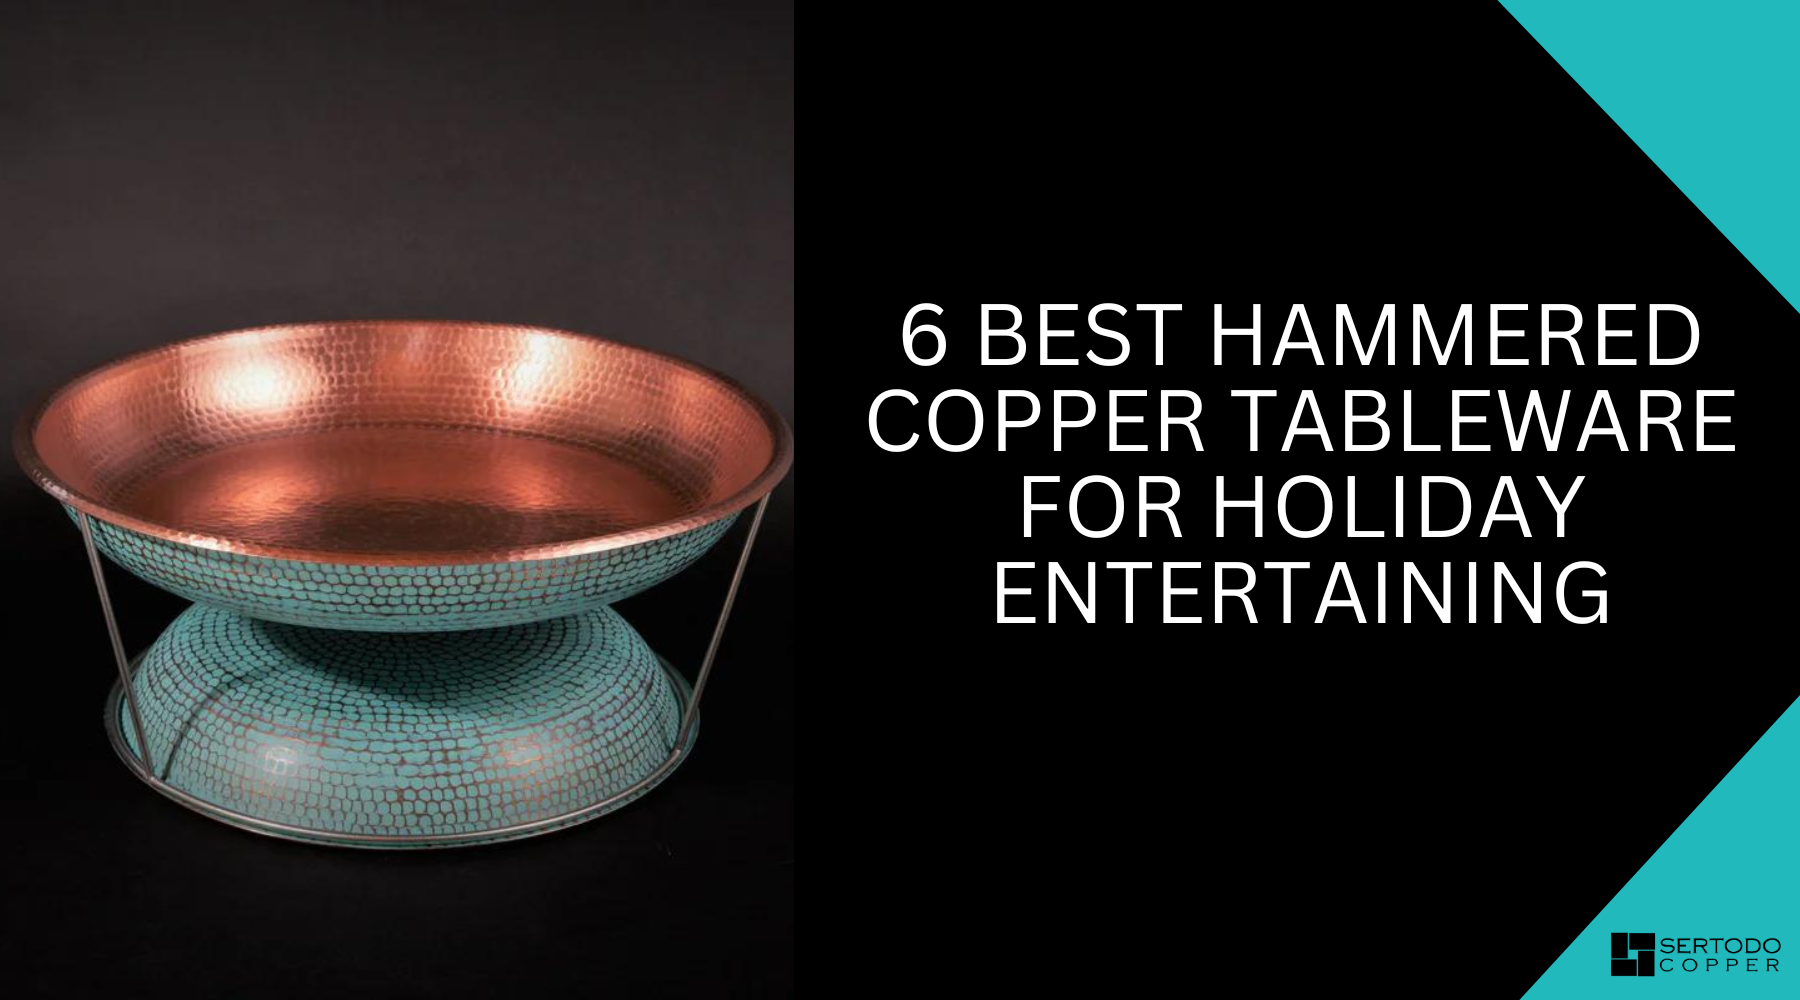 Hammered Copper Tableware For Holiday Entertaining